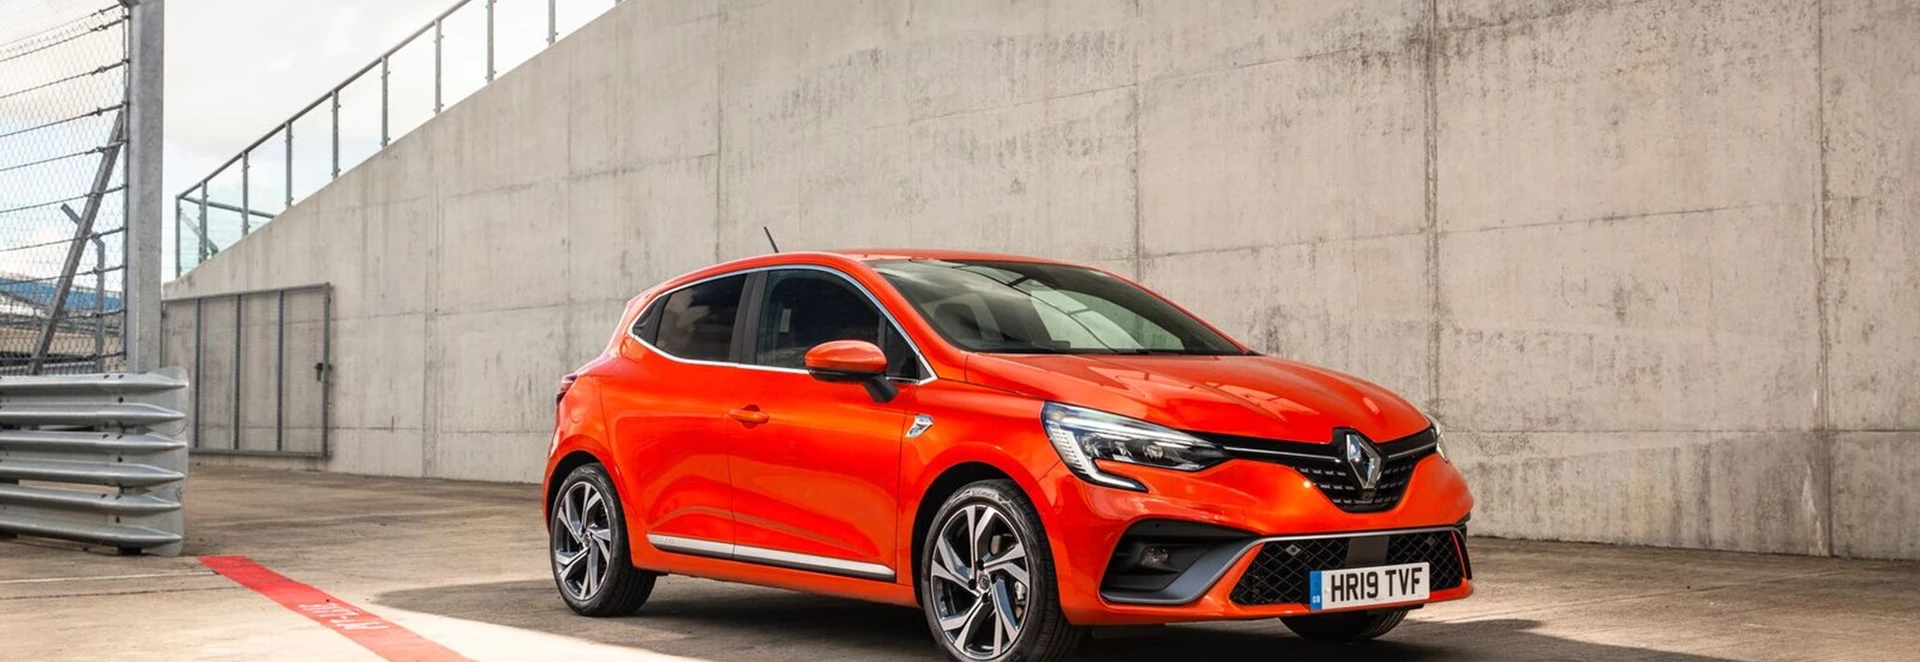 New Renault Clio named Carbuyer’s car of the year 2020